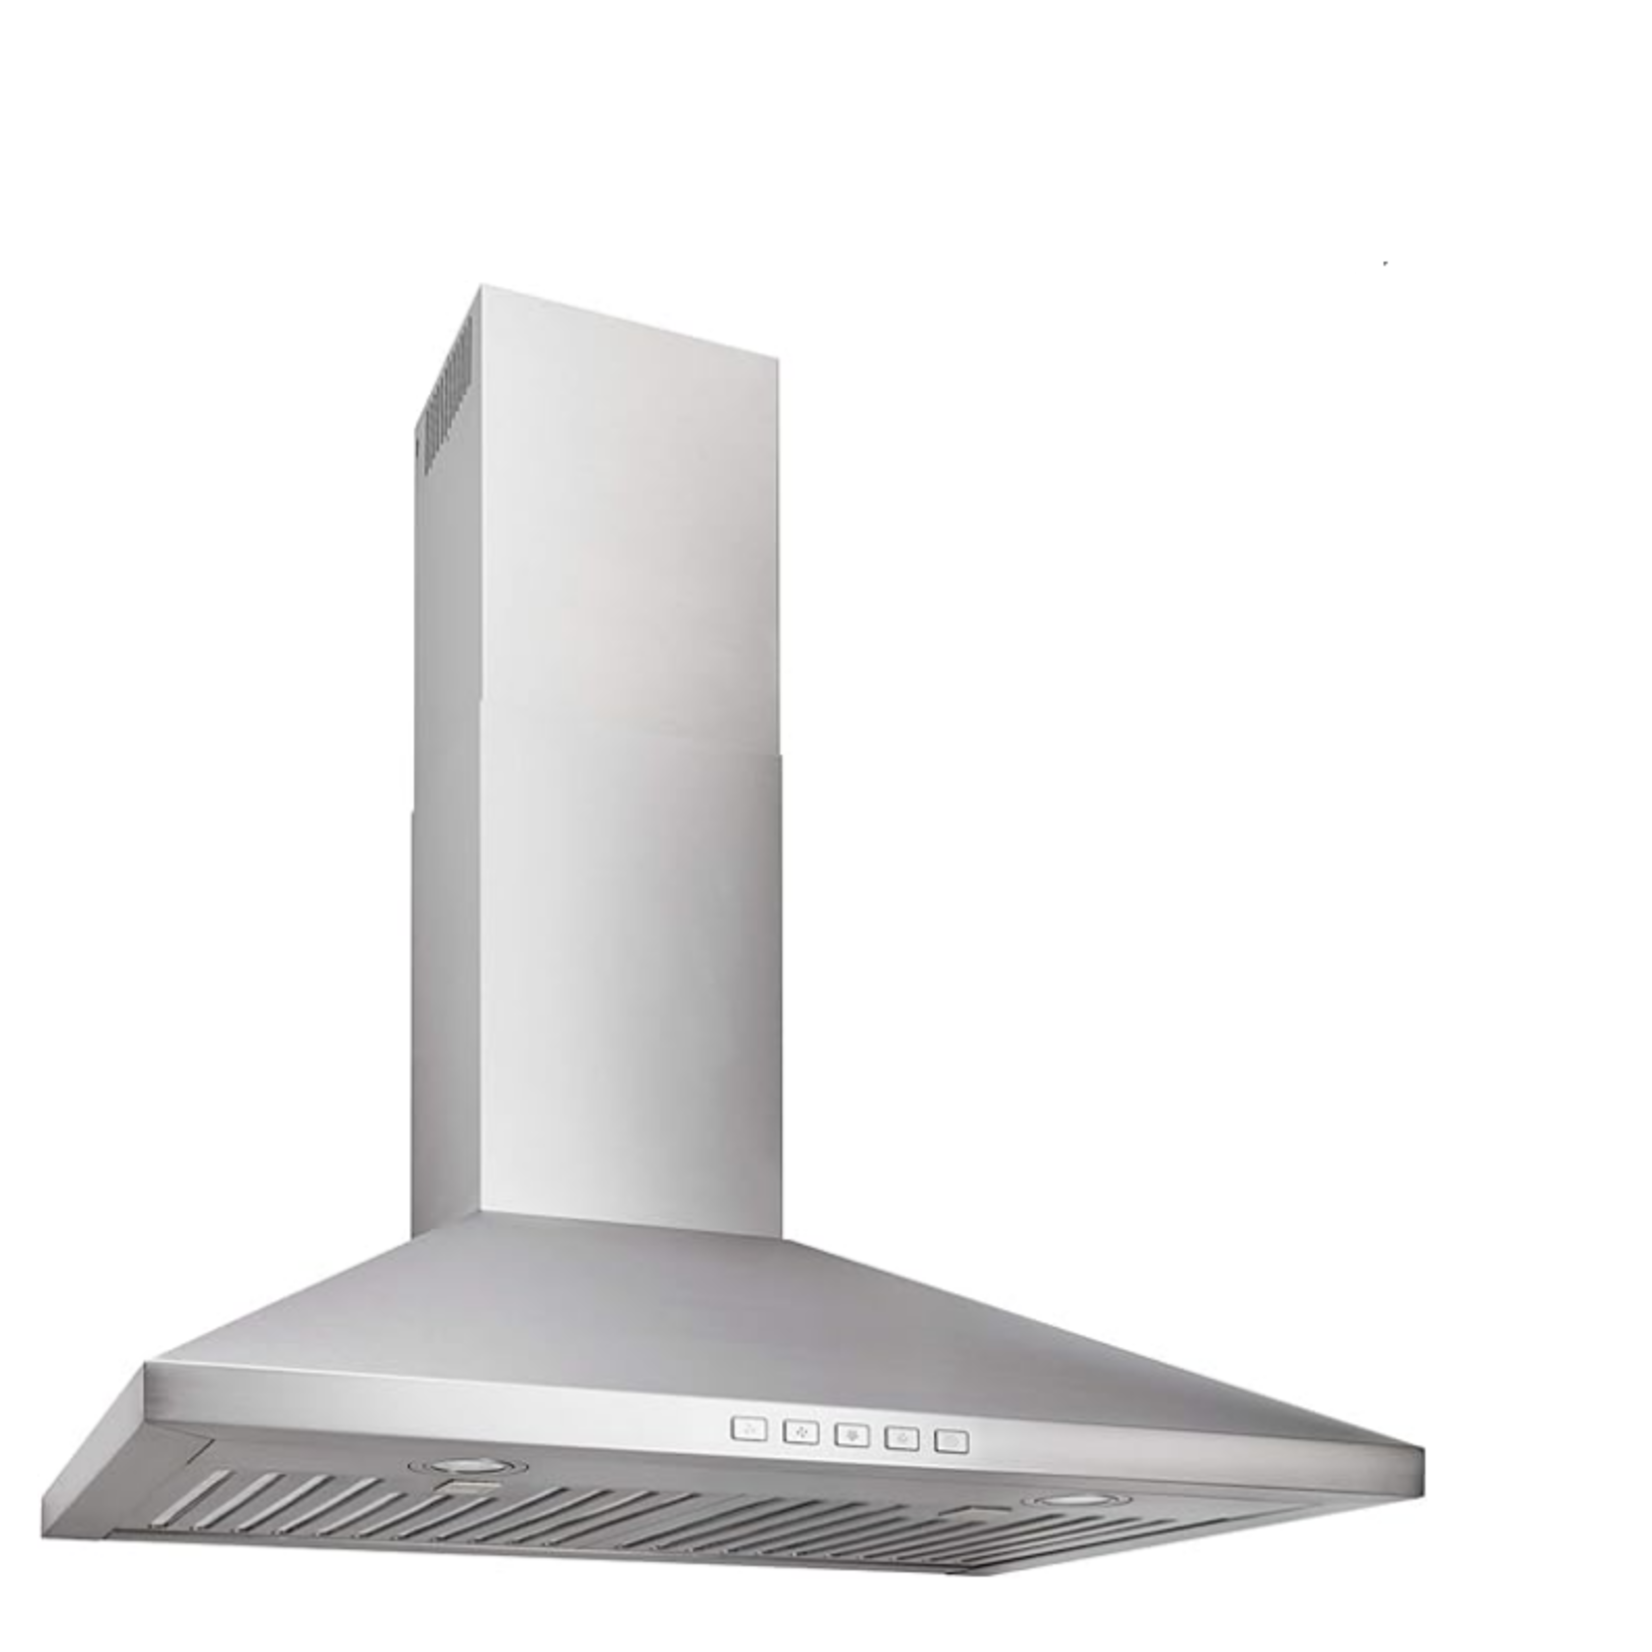 Discount Central Broan-NuTone BWP2306SS Convertible Wall-Mount LED Lights Pyramidal Chimney Range Hood, 630 MAX Blower CFM, 30-Inch, Stainless Steel